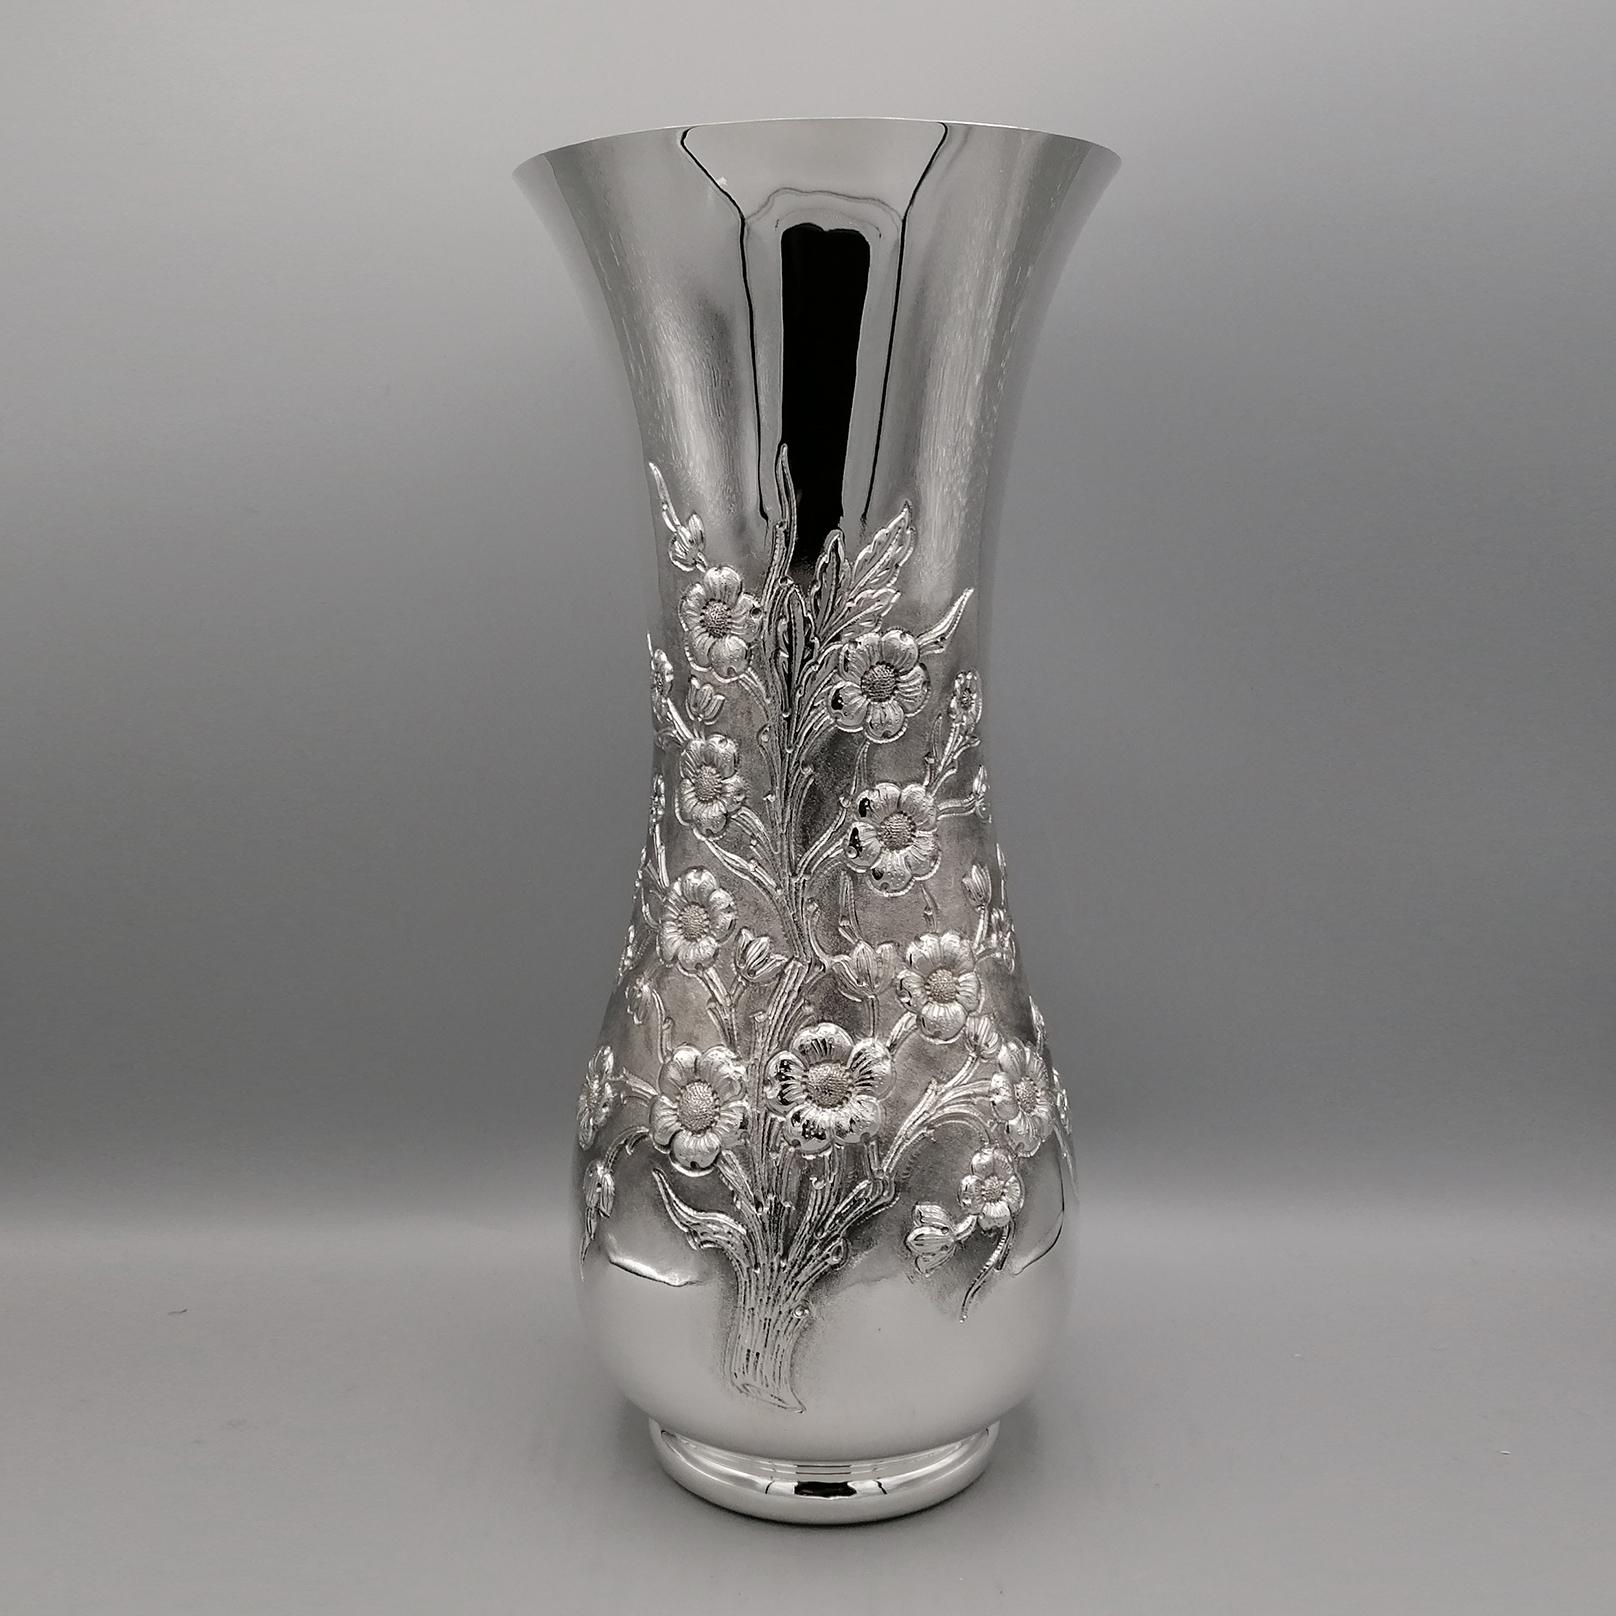 Sterling silver vase with a sinuous and classic shape.
The vase was made from a 925 silver plate and subsequently embossed with a design depicting a flowering branch.
The very fine chiseling was finished with a burin and engraved. a knurling was